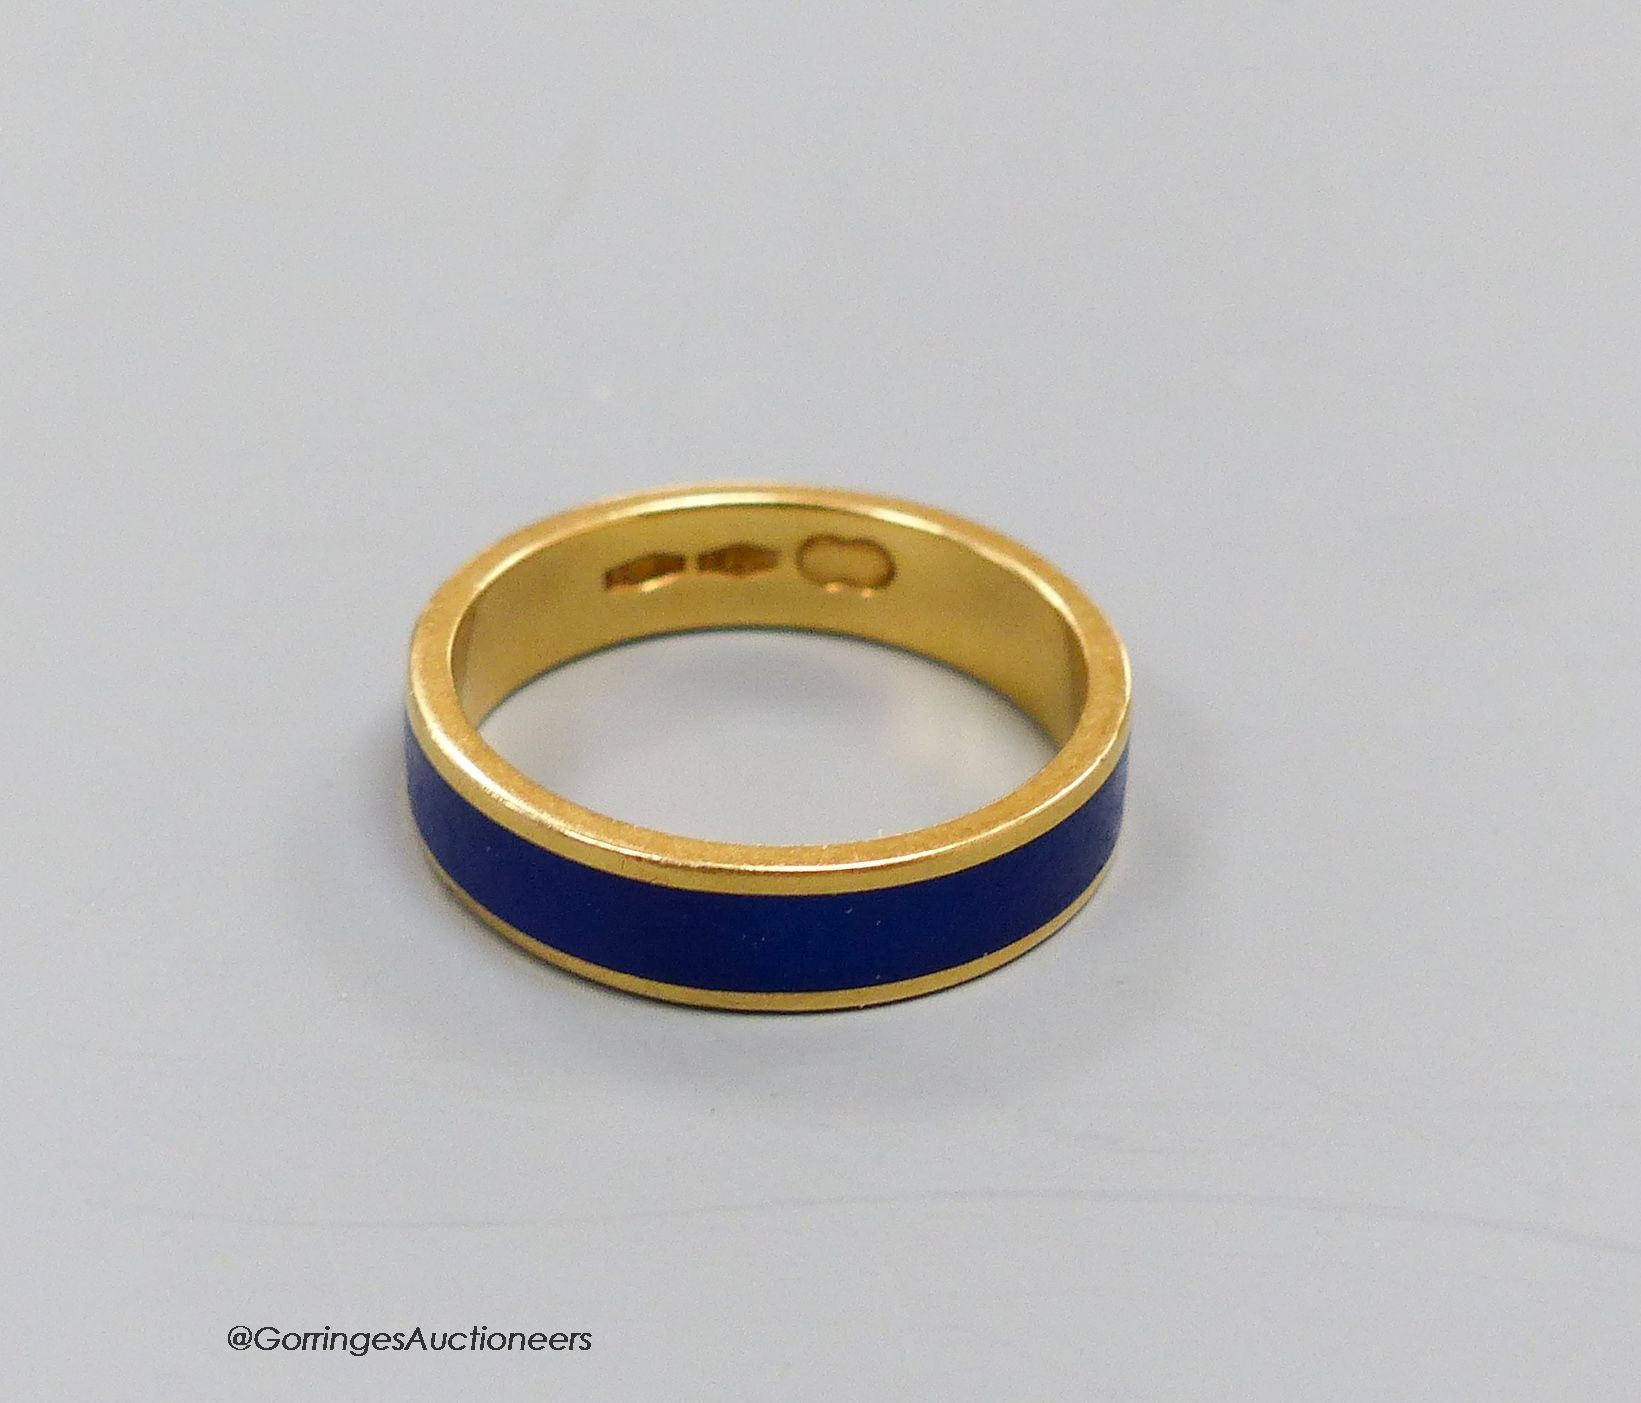 An 18ct. gold and blue enamel ring, size J, 3.9g.